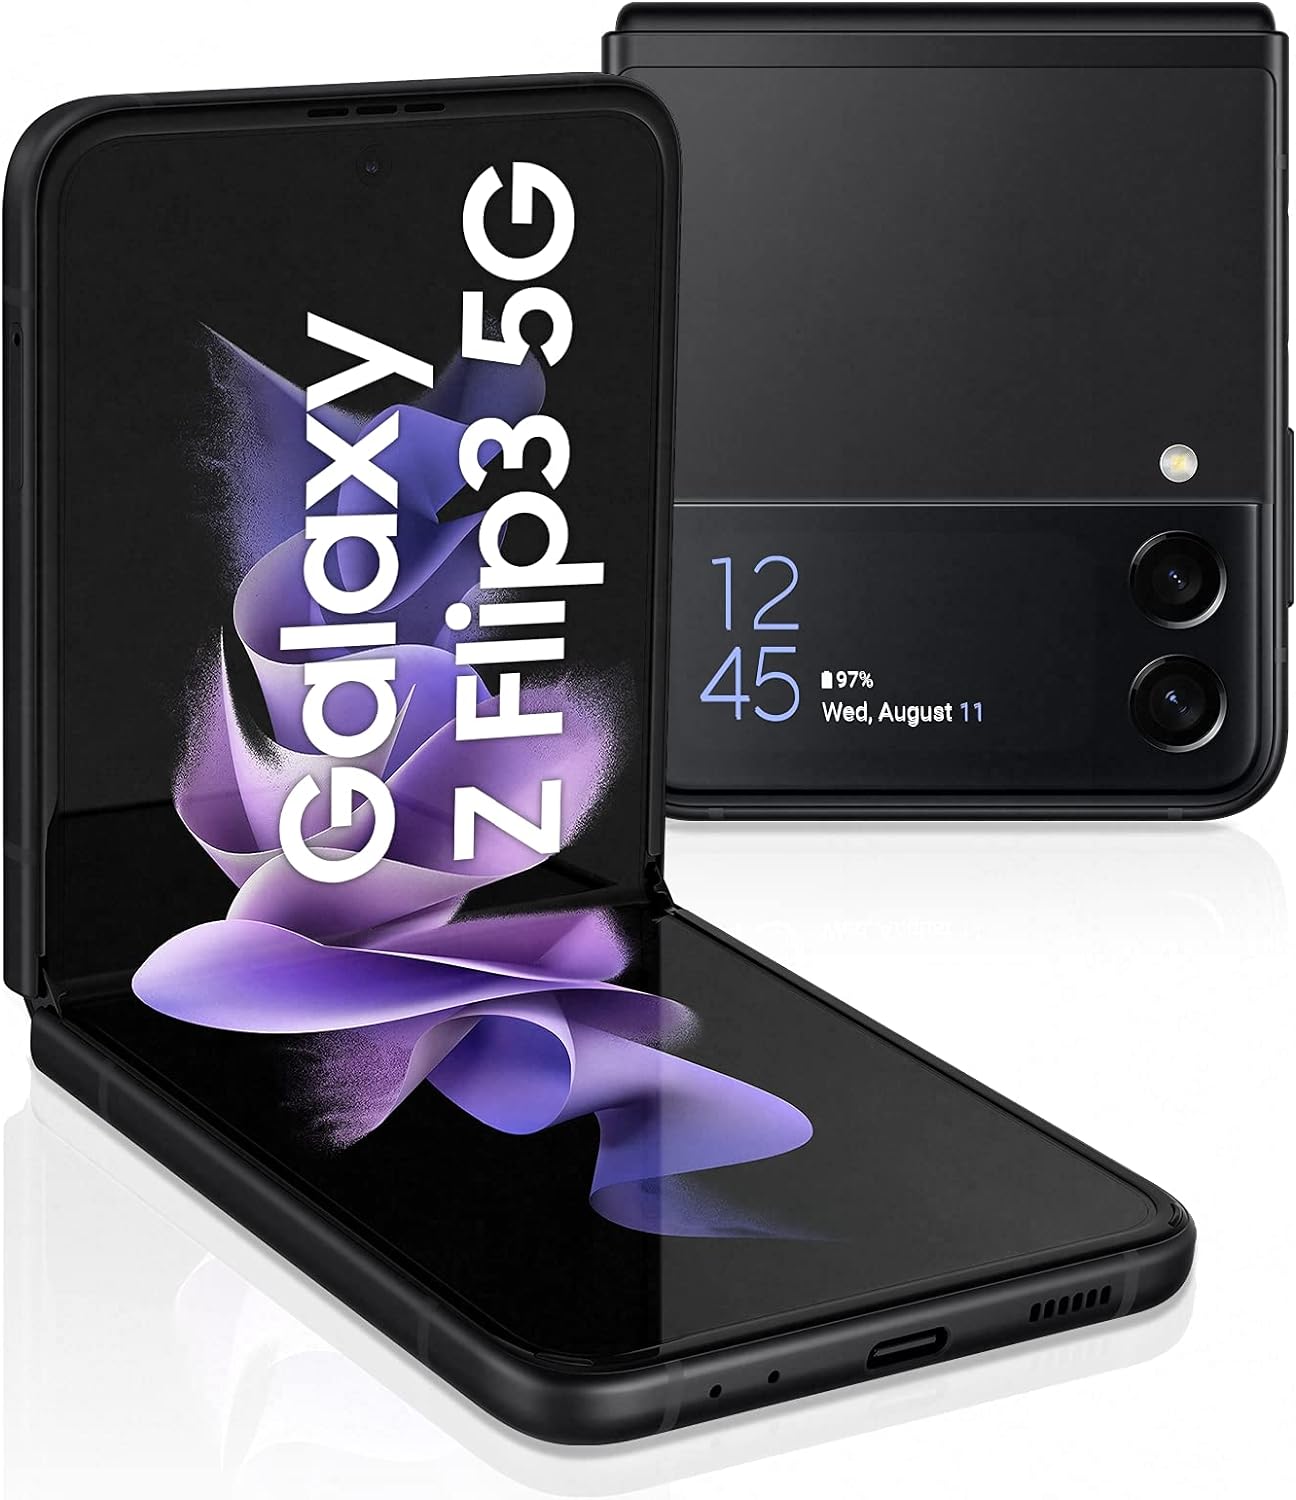 SAMSUNG Galaxy Z Flip3 5G in Phantom Black, a foldable screen phone with stunning design and dual rear cameras. 8806092812482